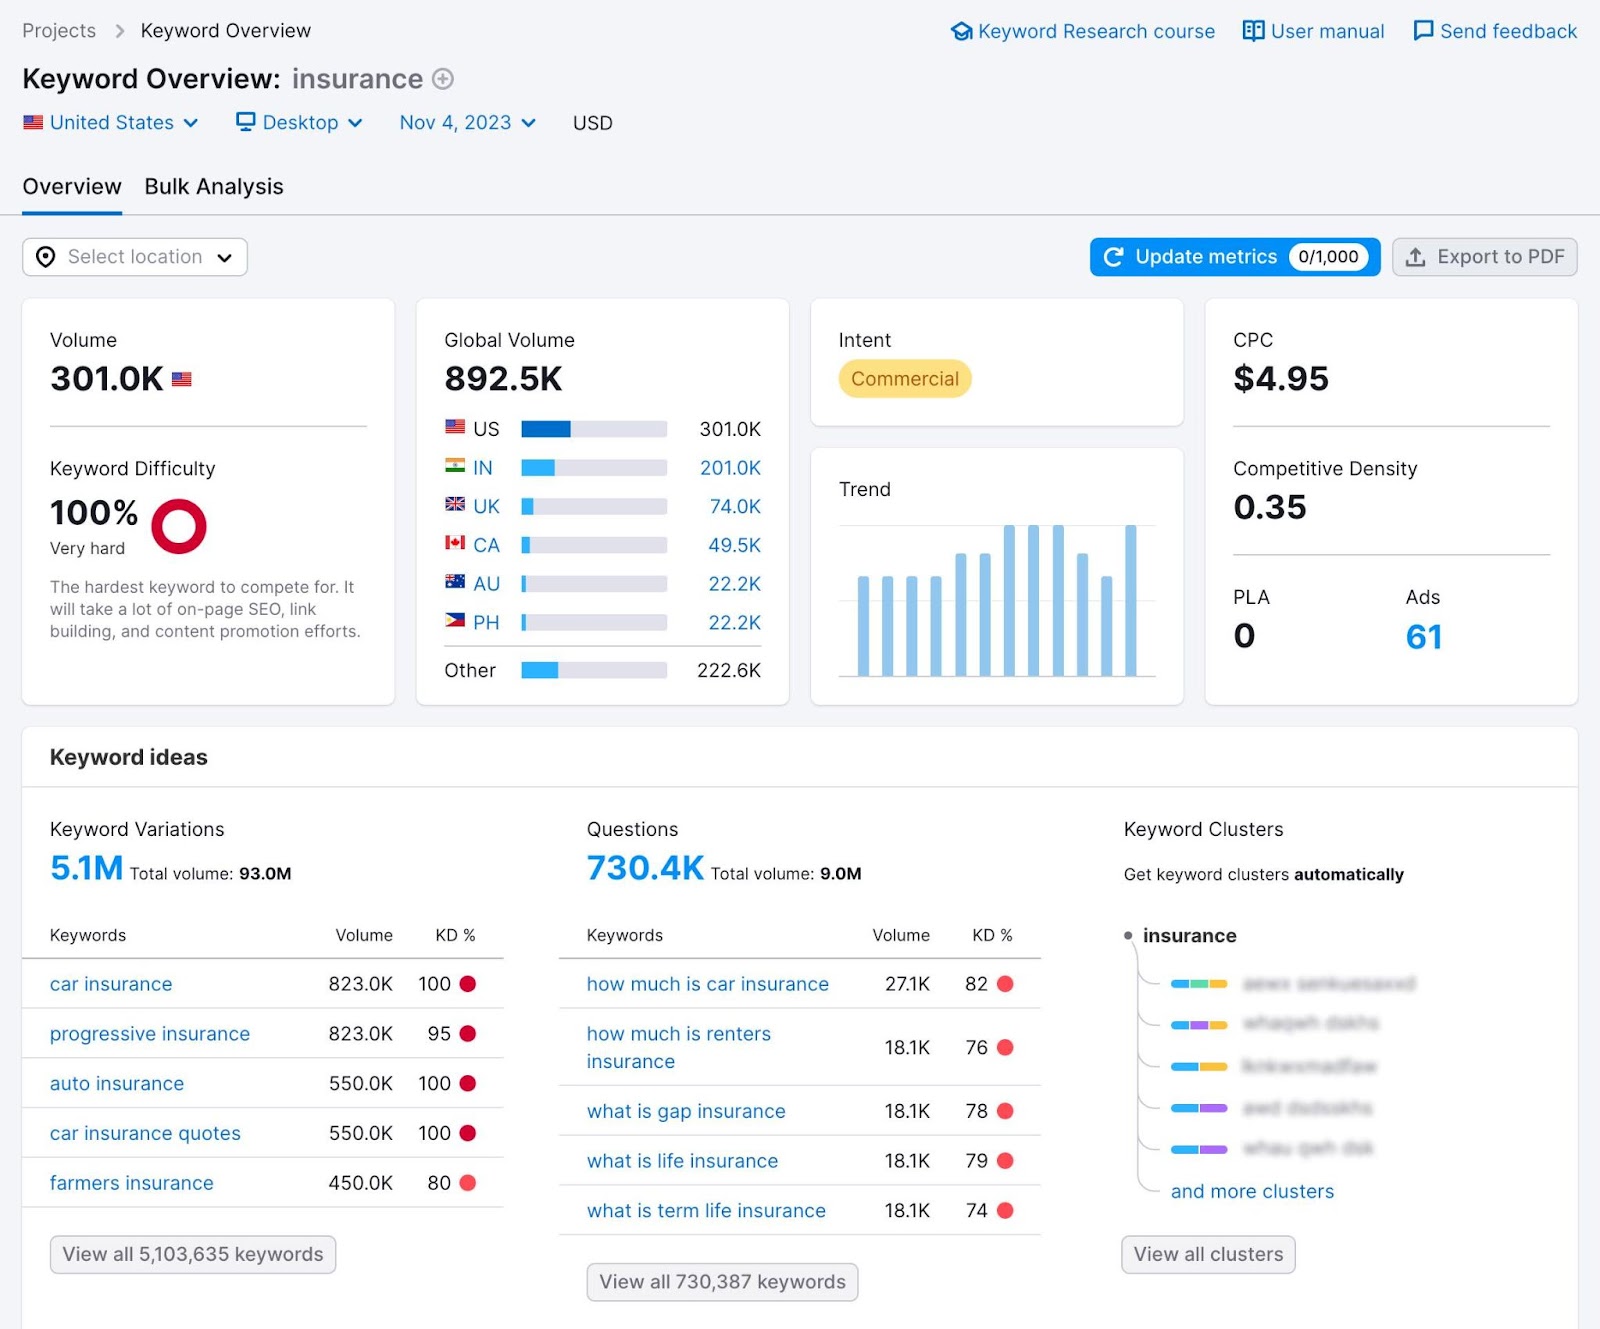 Keyword Overview dashboard for "insurance"